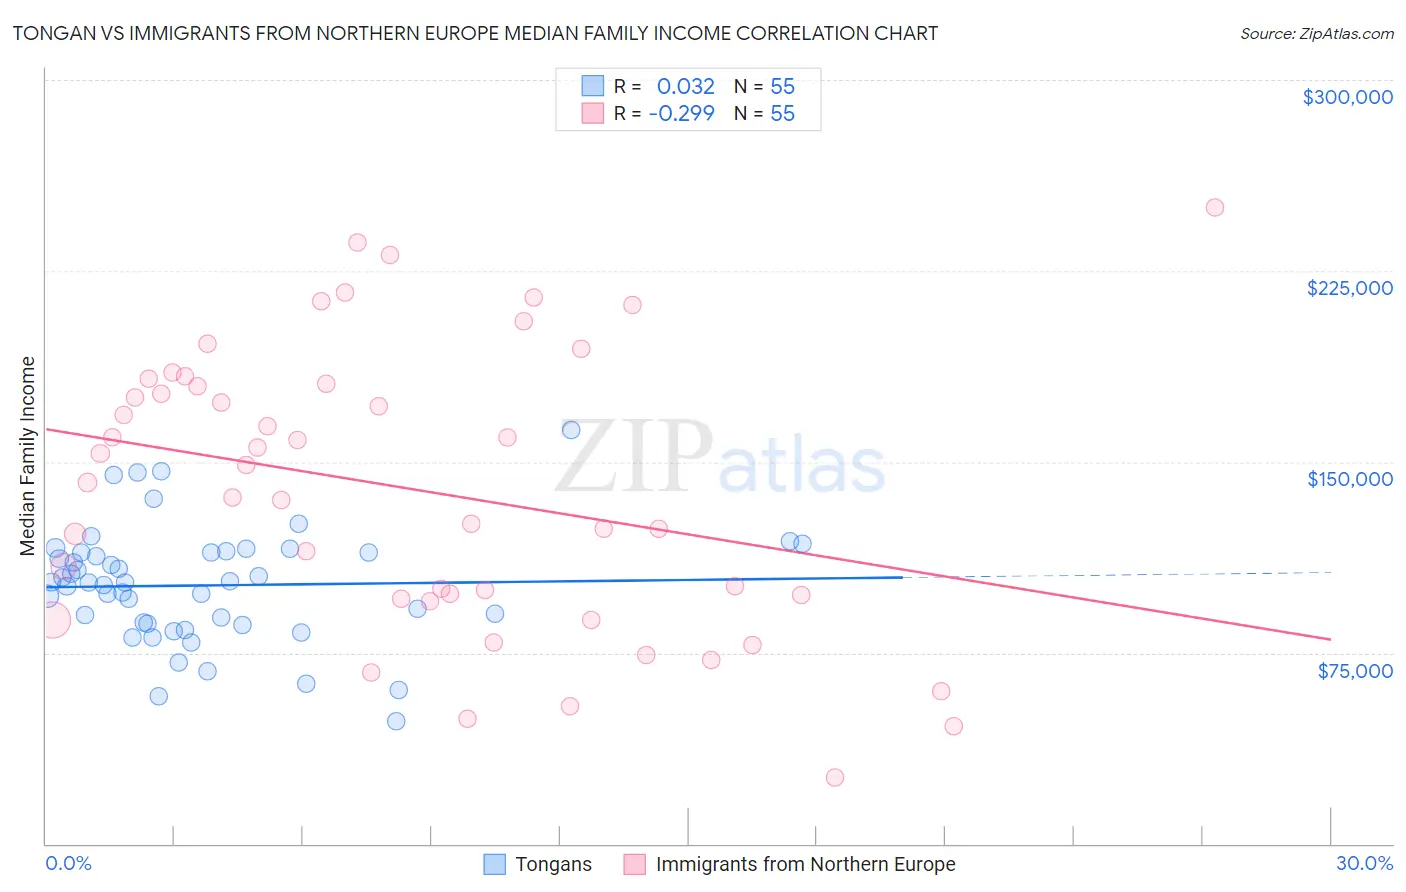 Tongan vs Immigrants from Northern Europe Median Family Income